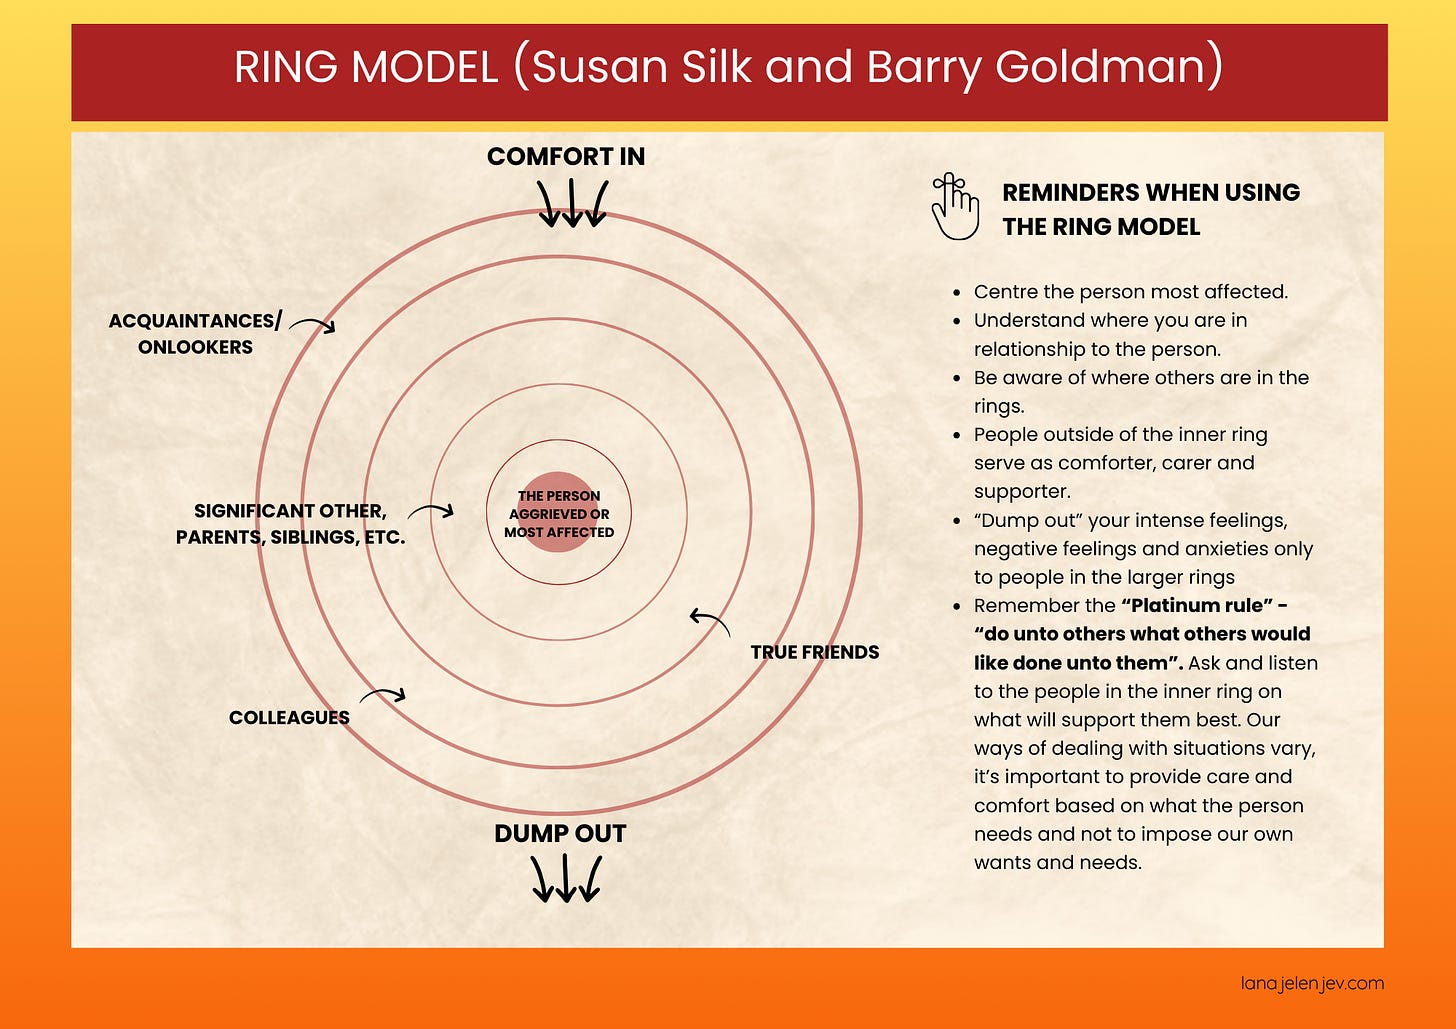 RIng Model by Susan Silk and Barry Goldman